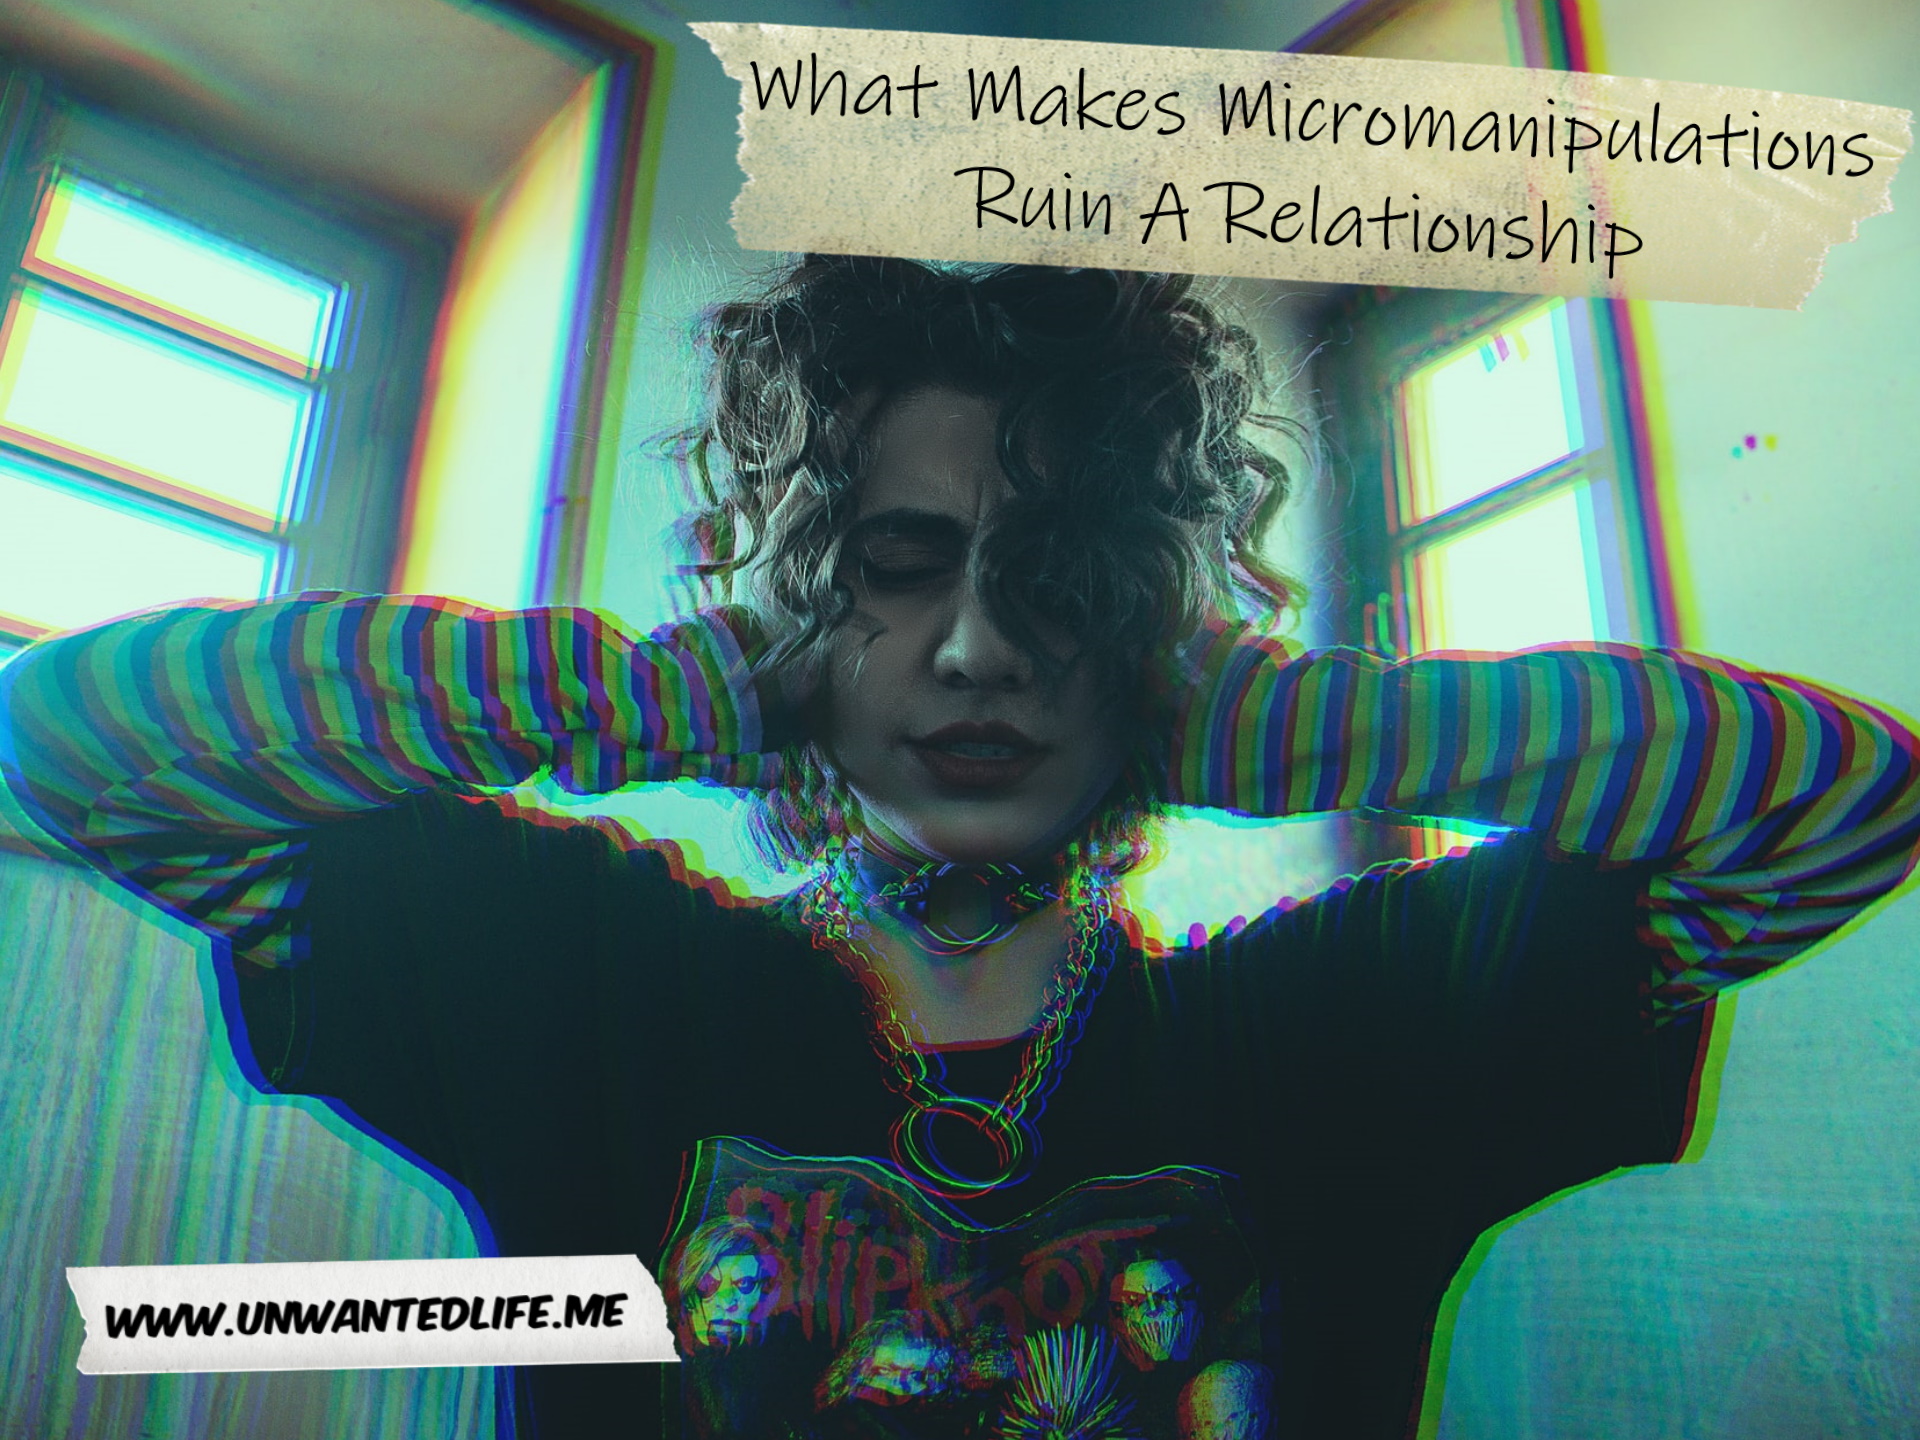 A photo of a female metalhead wearing a Slipknot T-shirt with her hands over her ears to represent the topic of the article - What Makes Micromanipulations Ruin A Relationship